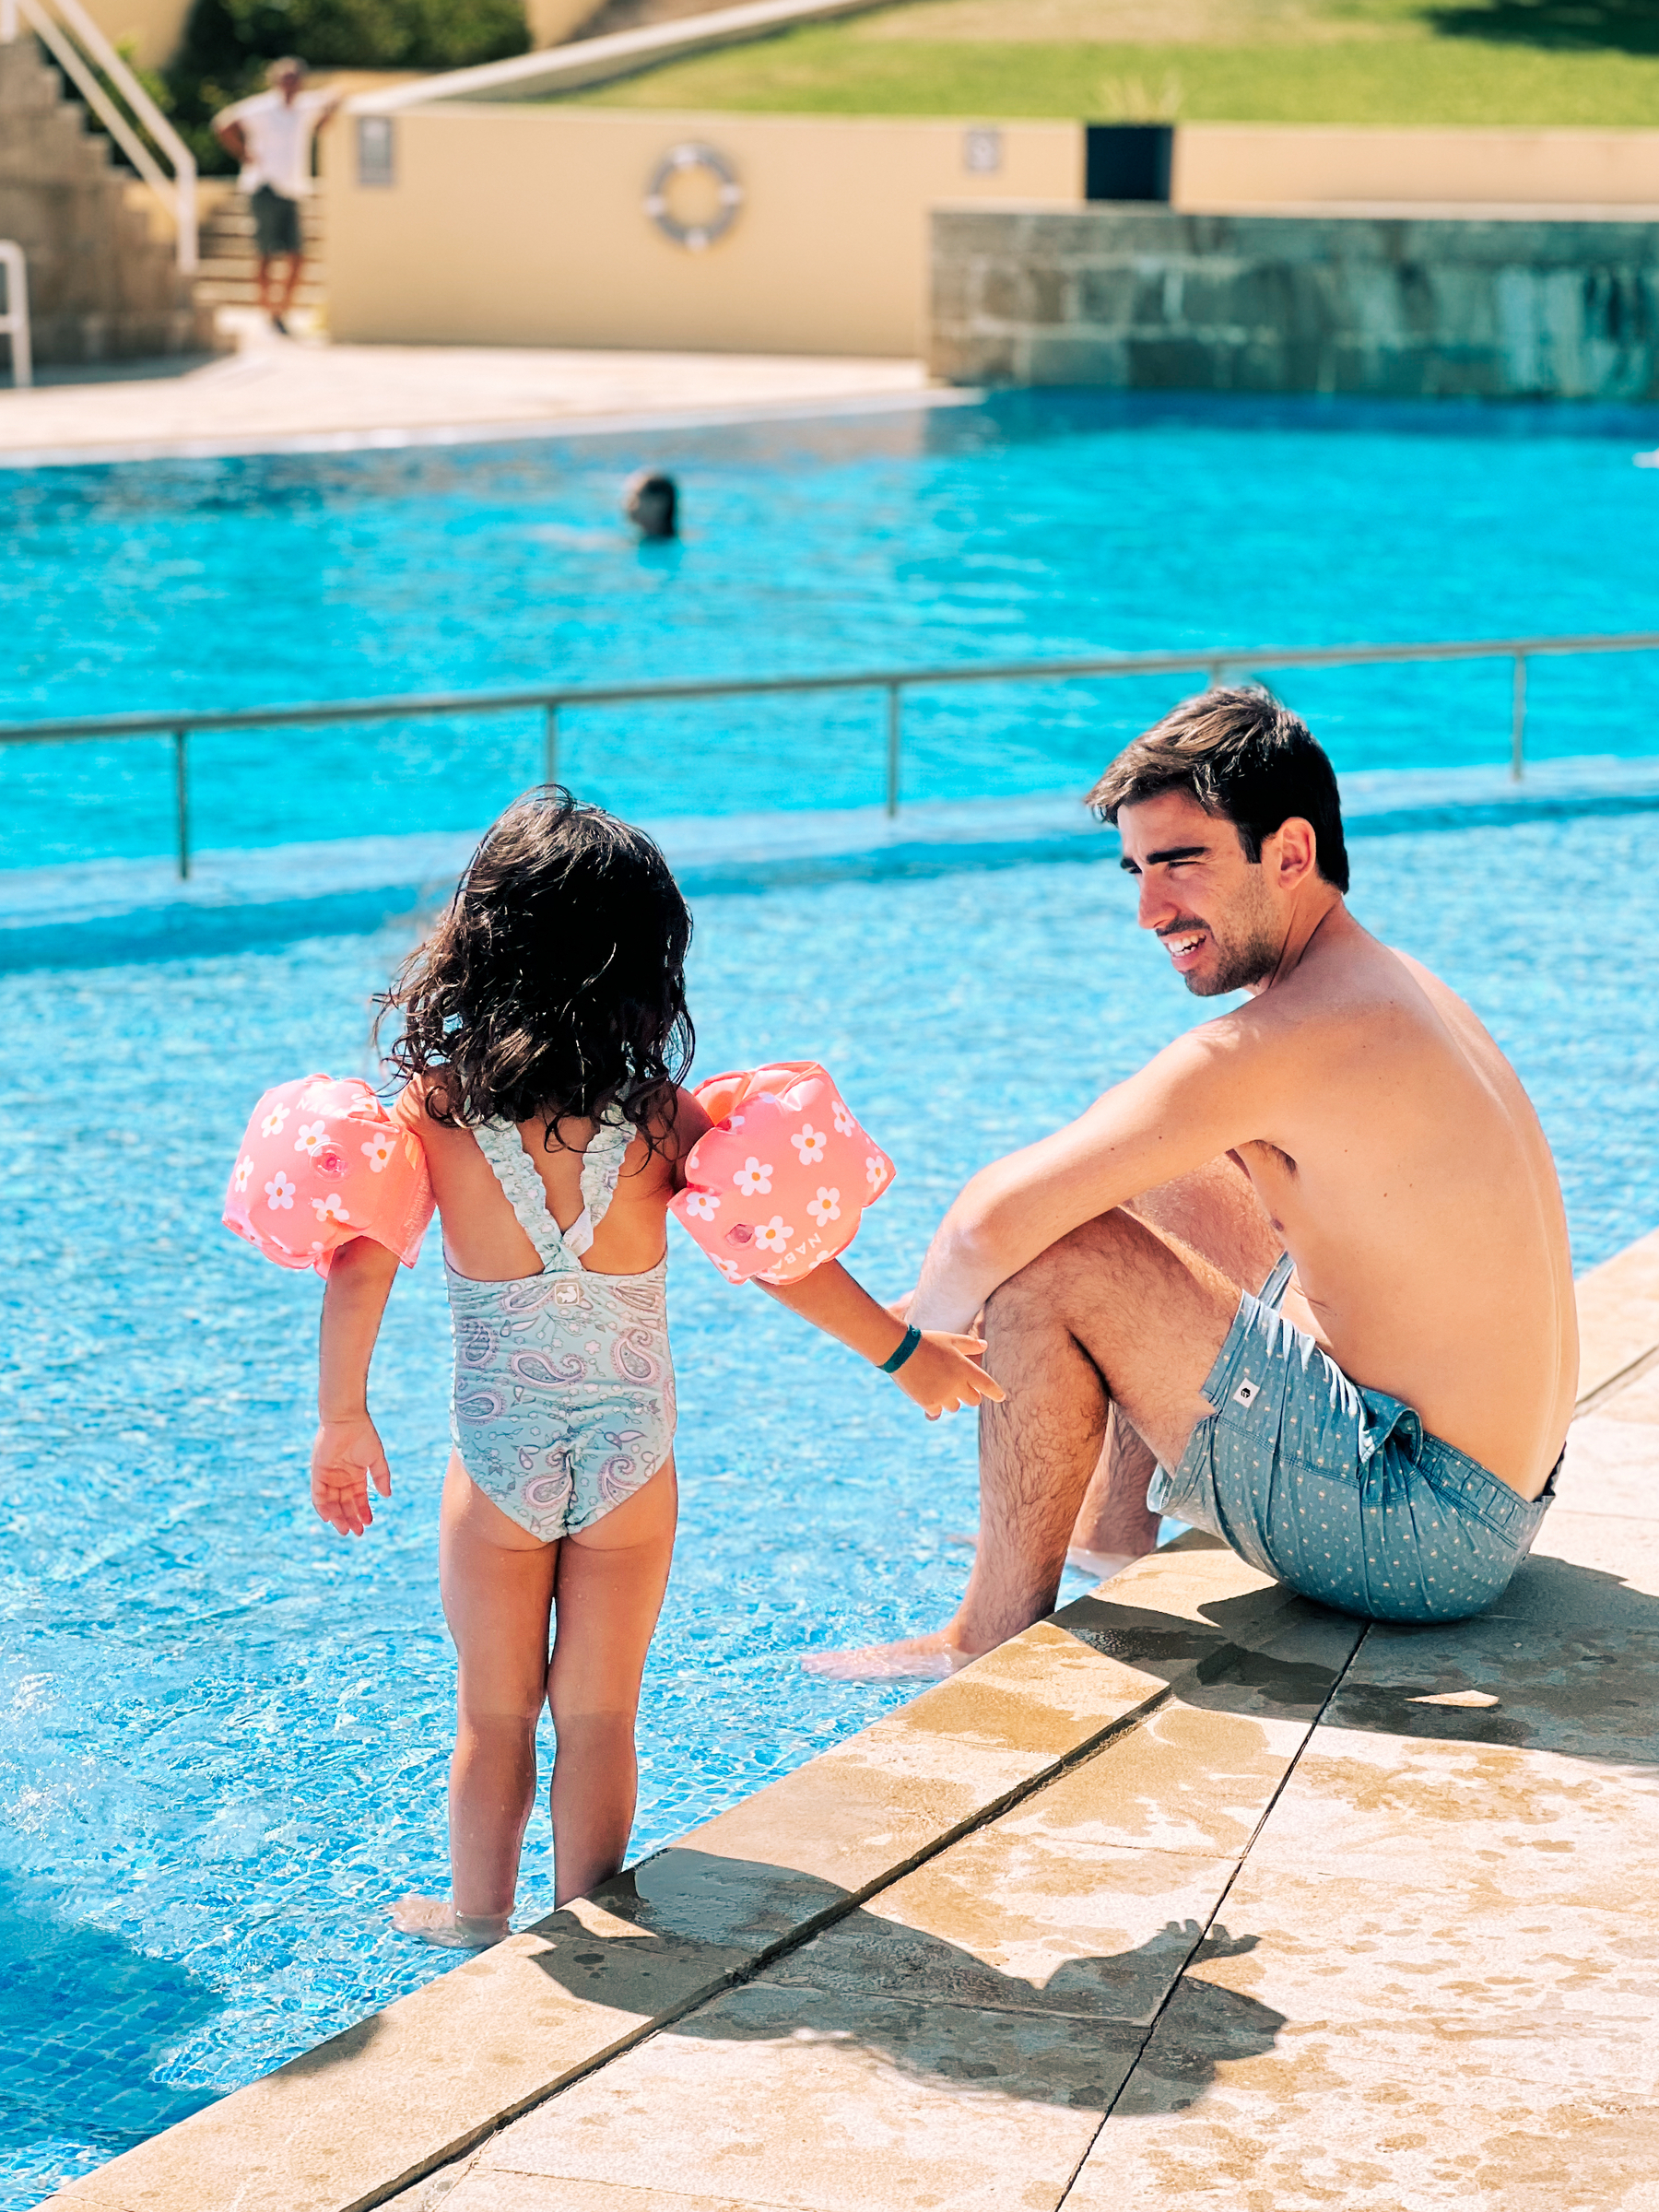 A girl standing in a pool, wearing floaters, talks to a man who’s sitting next to her. 